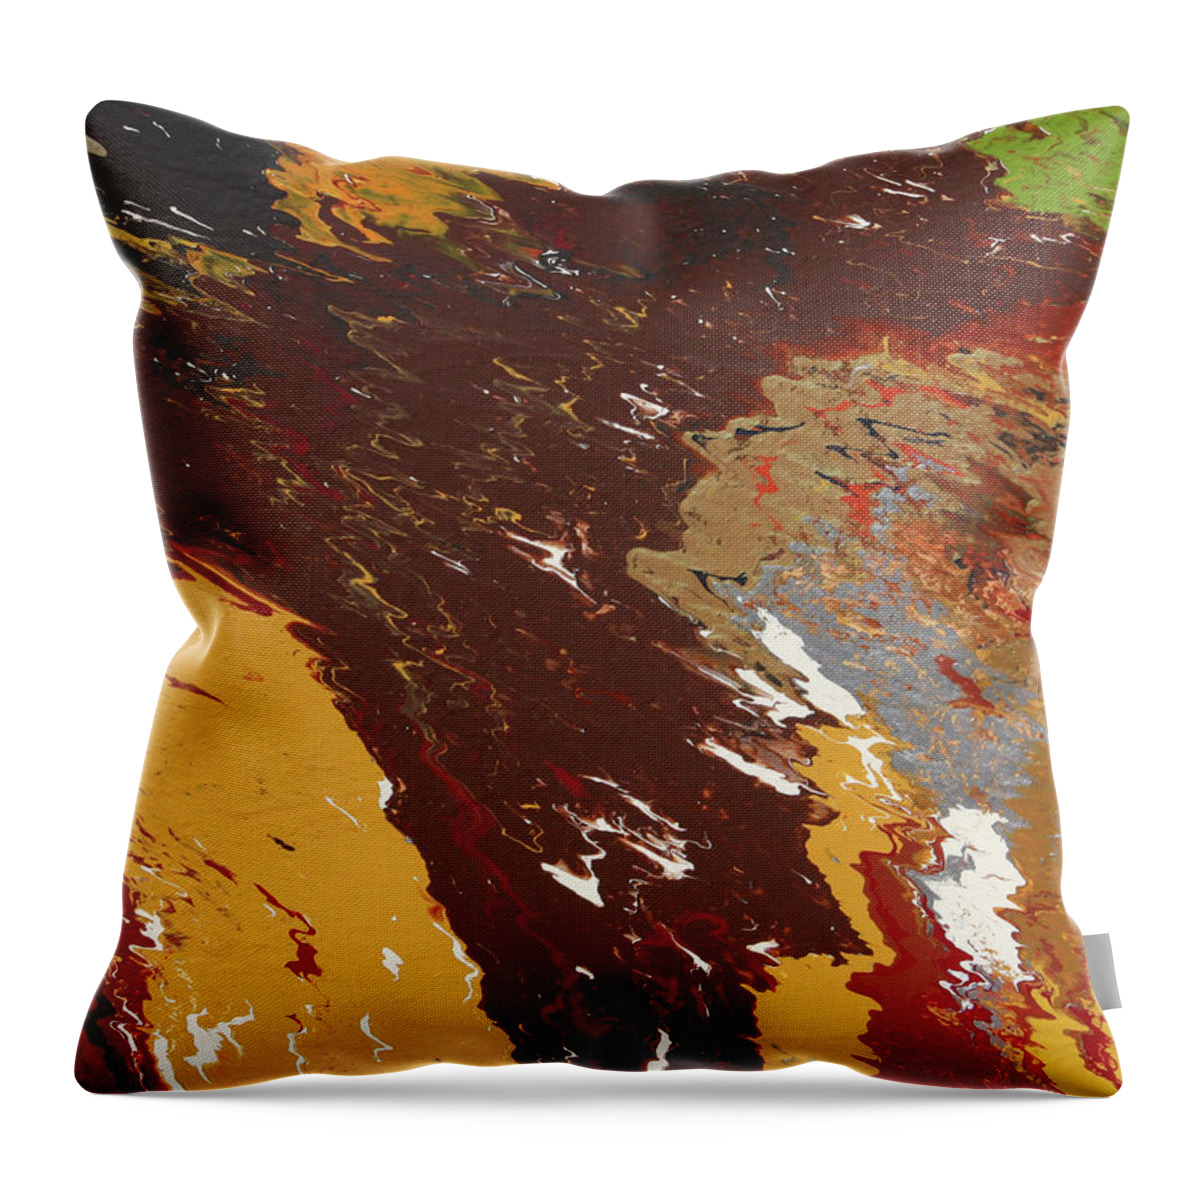 Fusionart Throw Pillow featuring the painting Strive by Ralph White